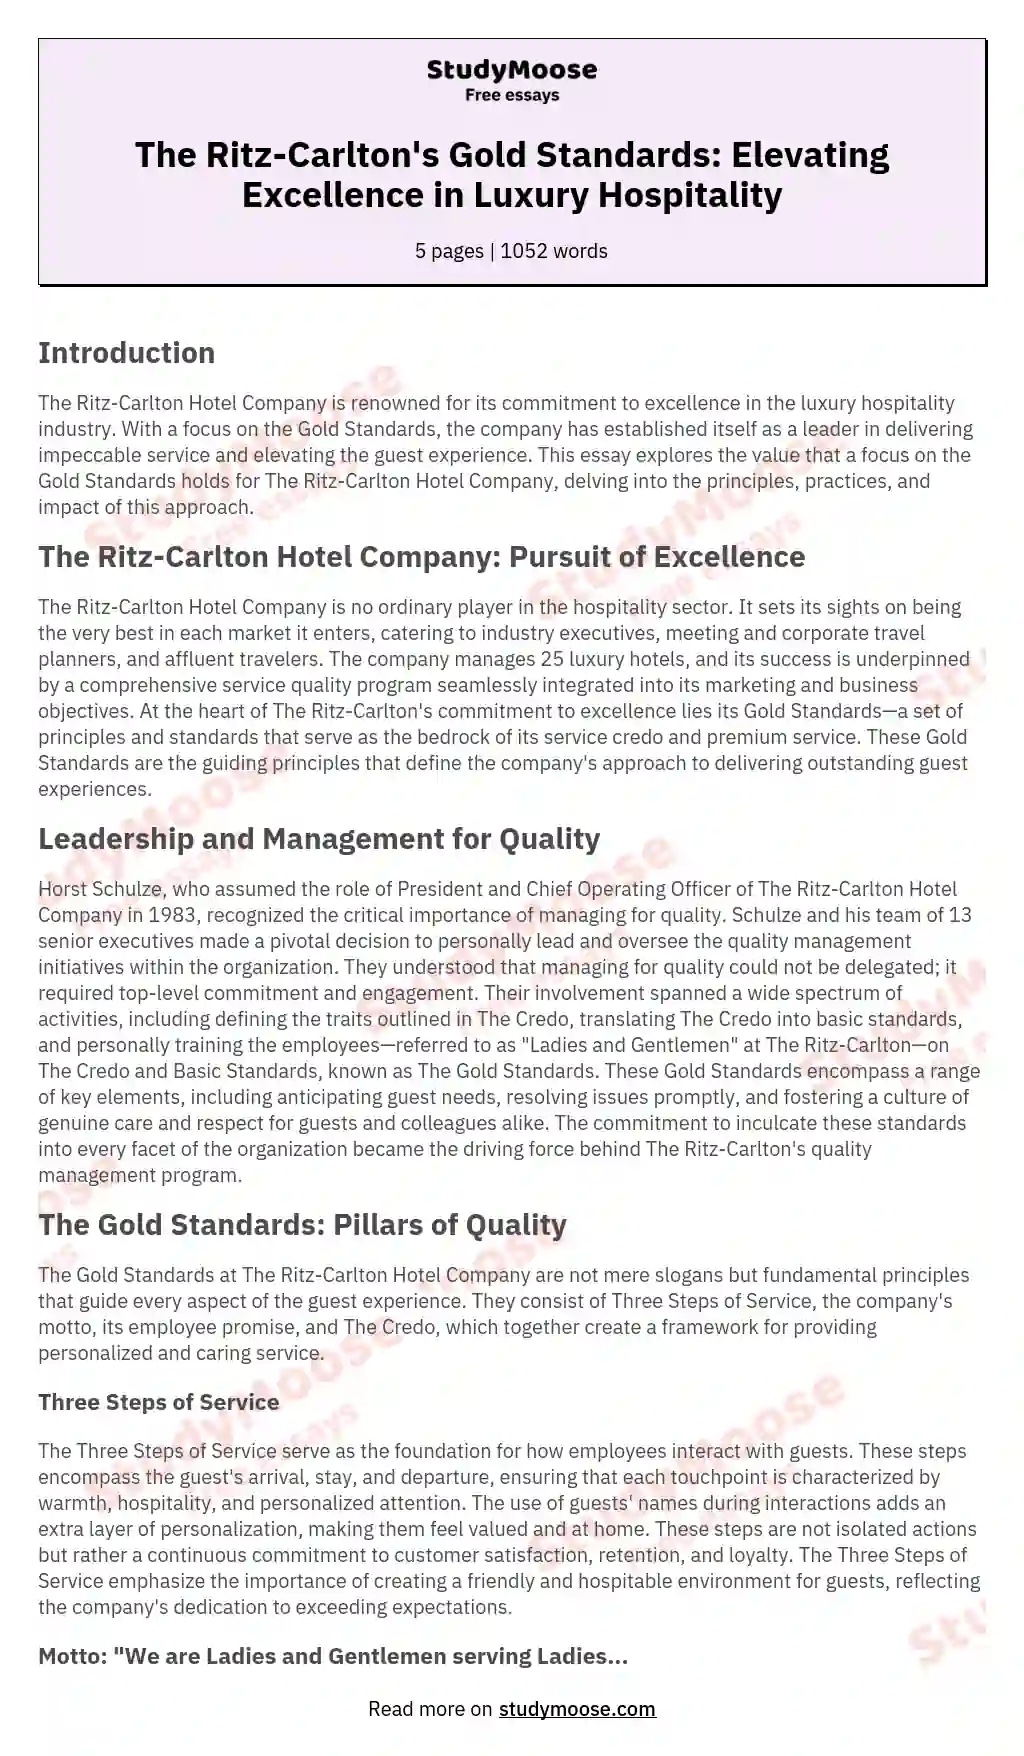 The Ritz-Carlton's Gold Standards: Elevating Excellence in Luxury Hospitality essay